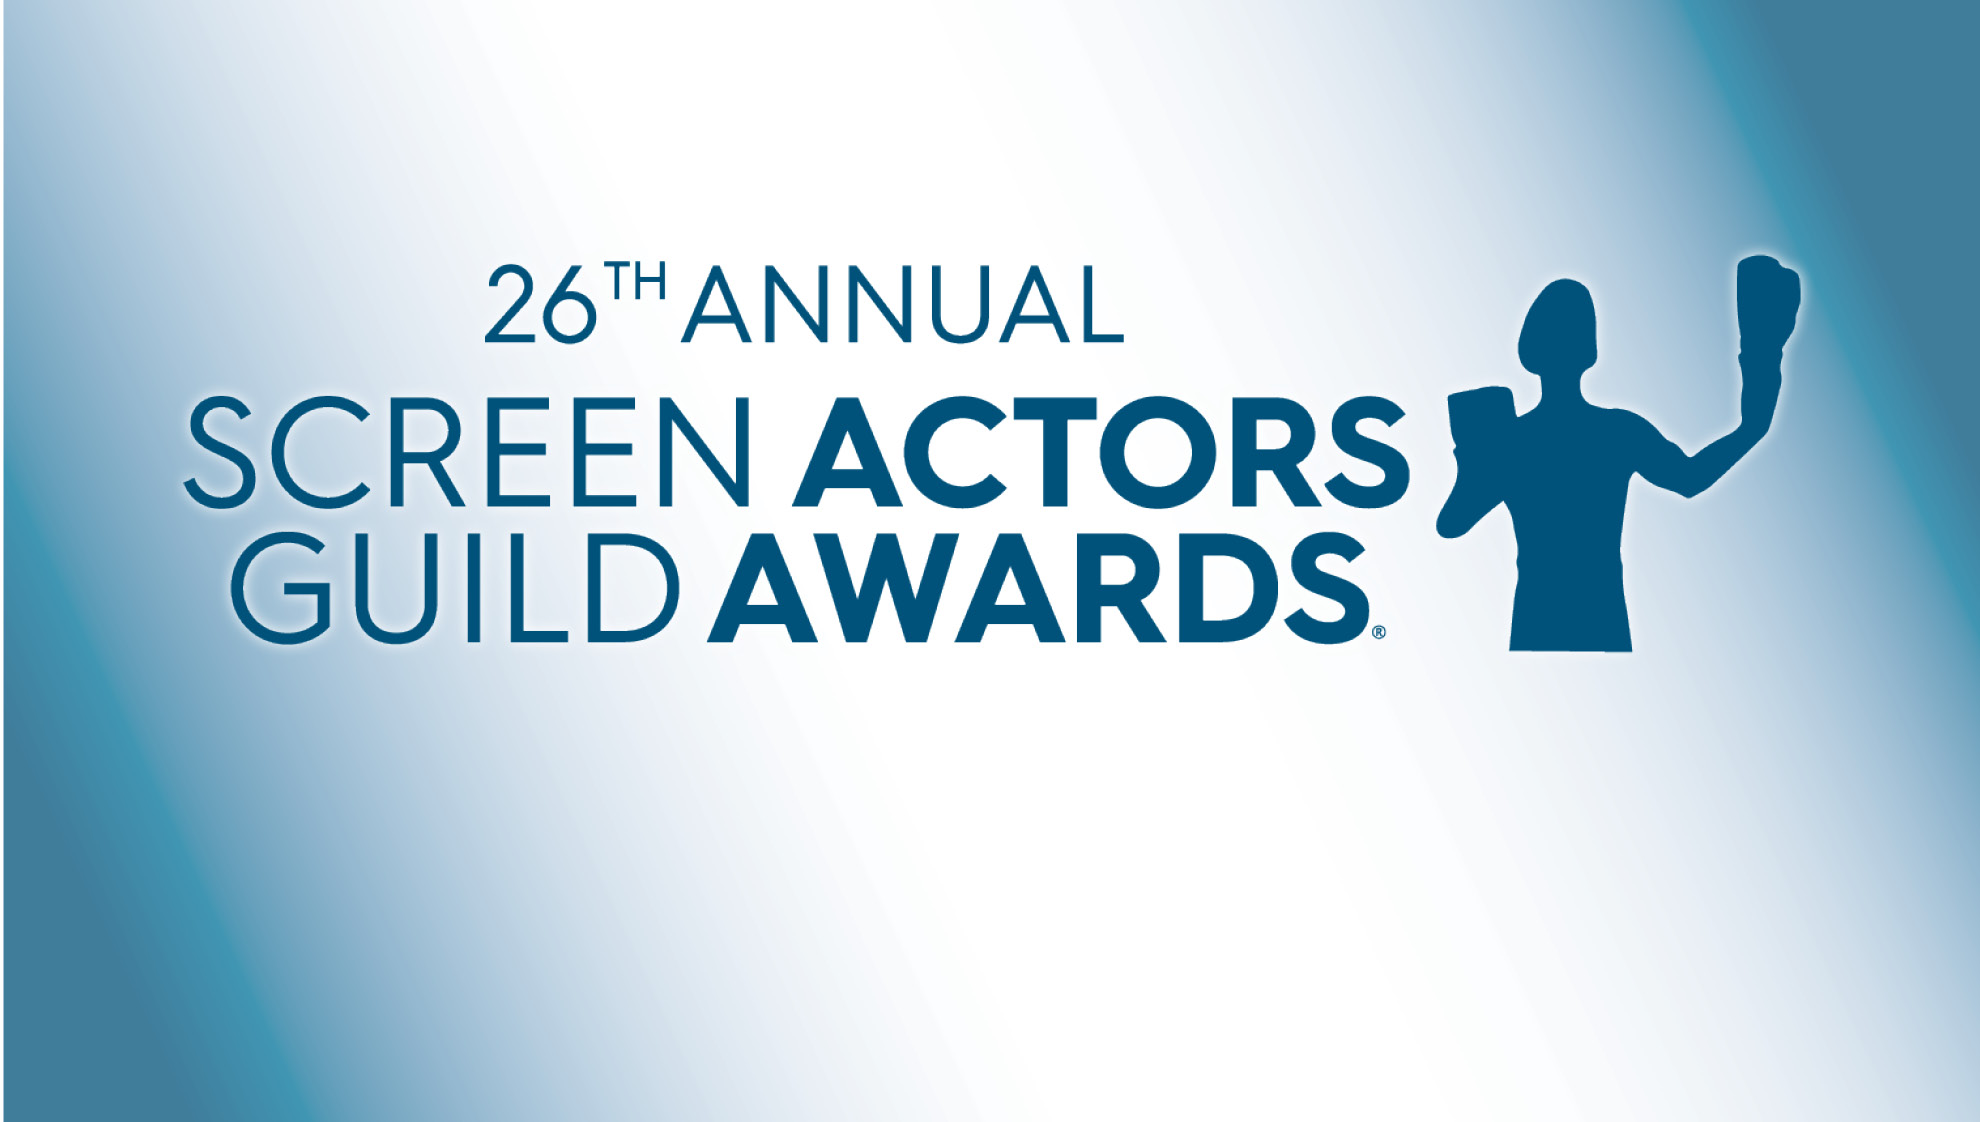 The Nominees For The 26th Annual Screen Actors Guild Awards